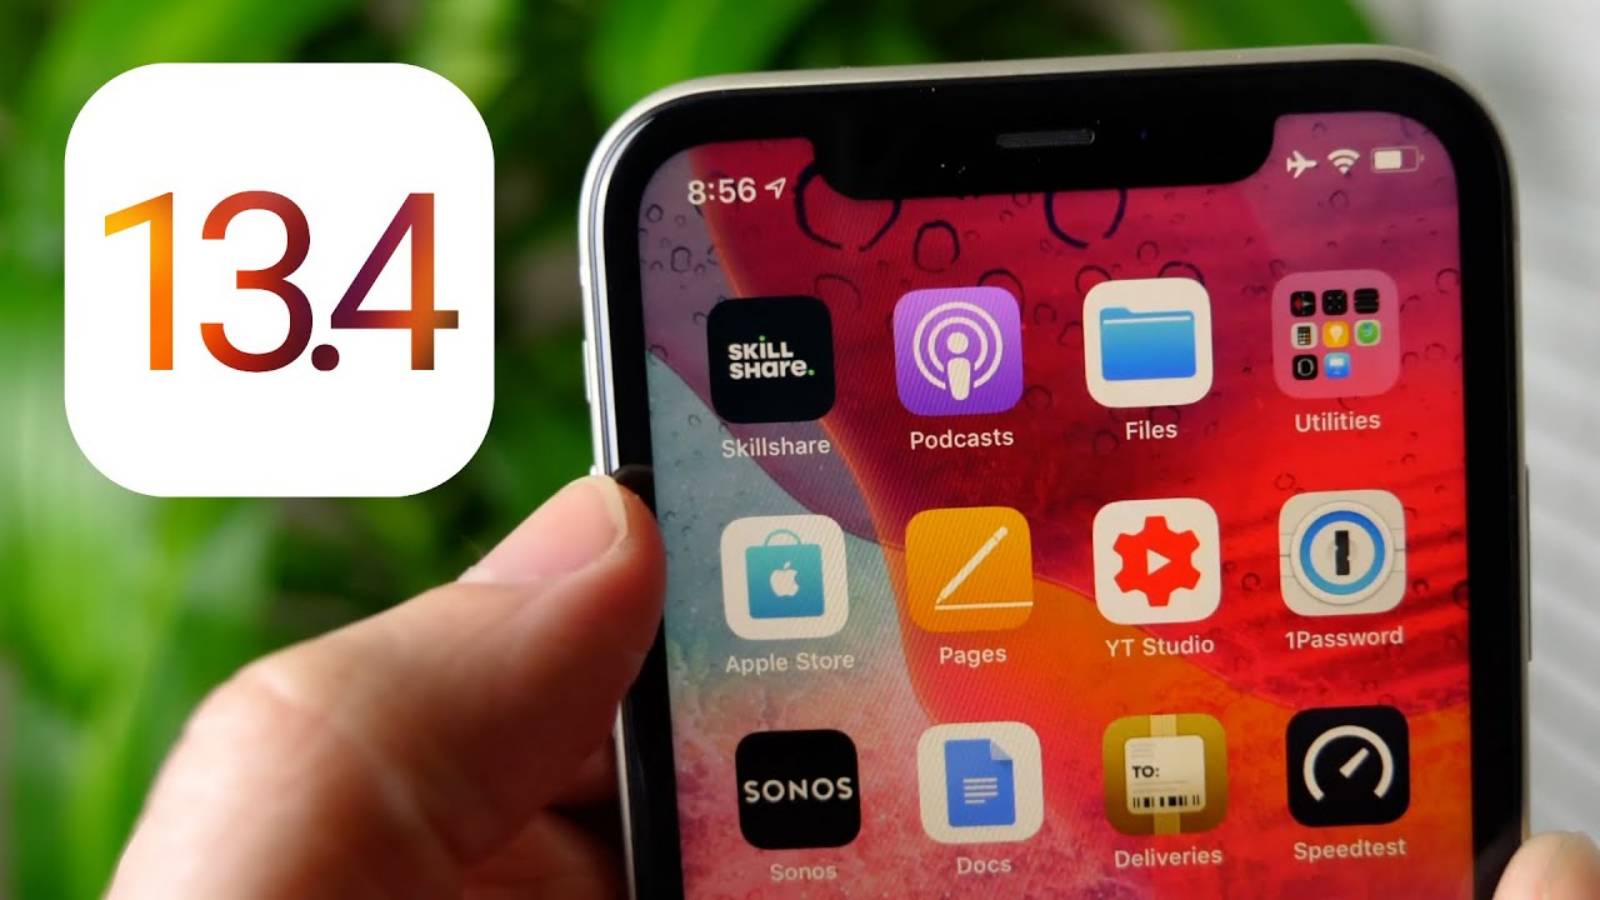 iOS 13.4 release March 17